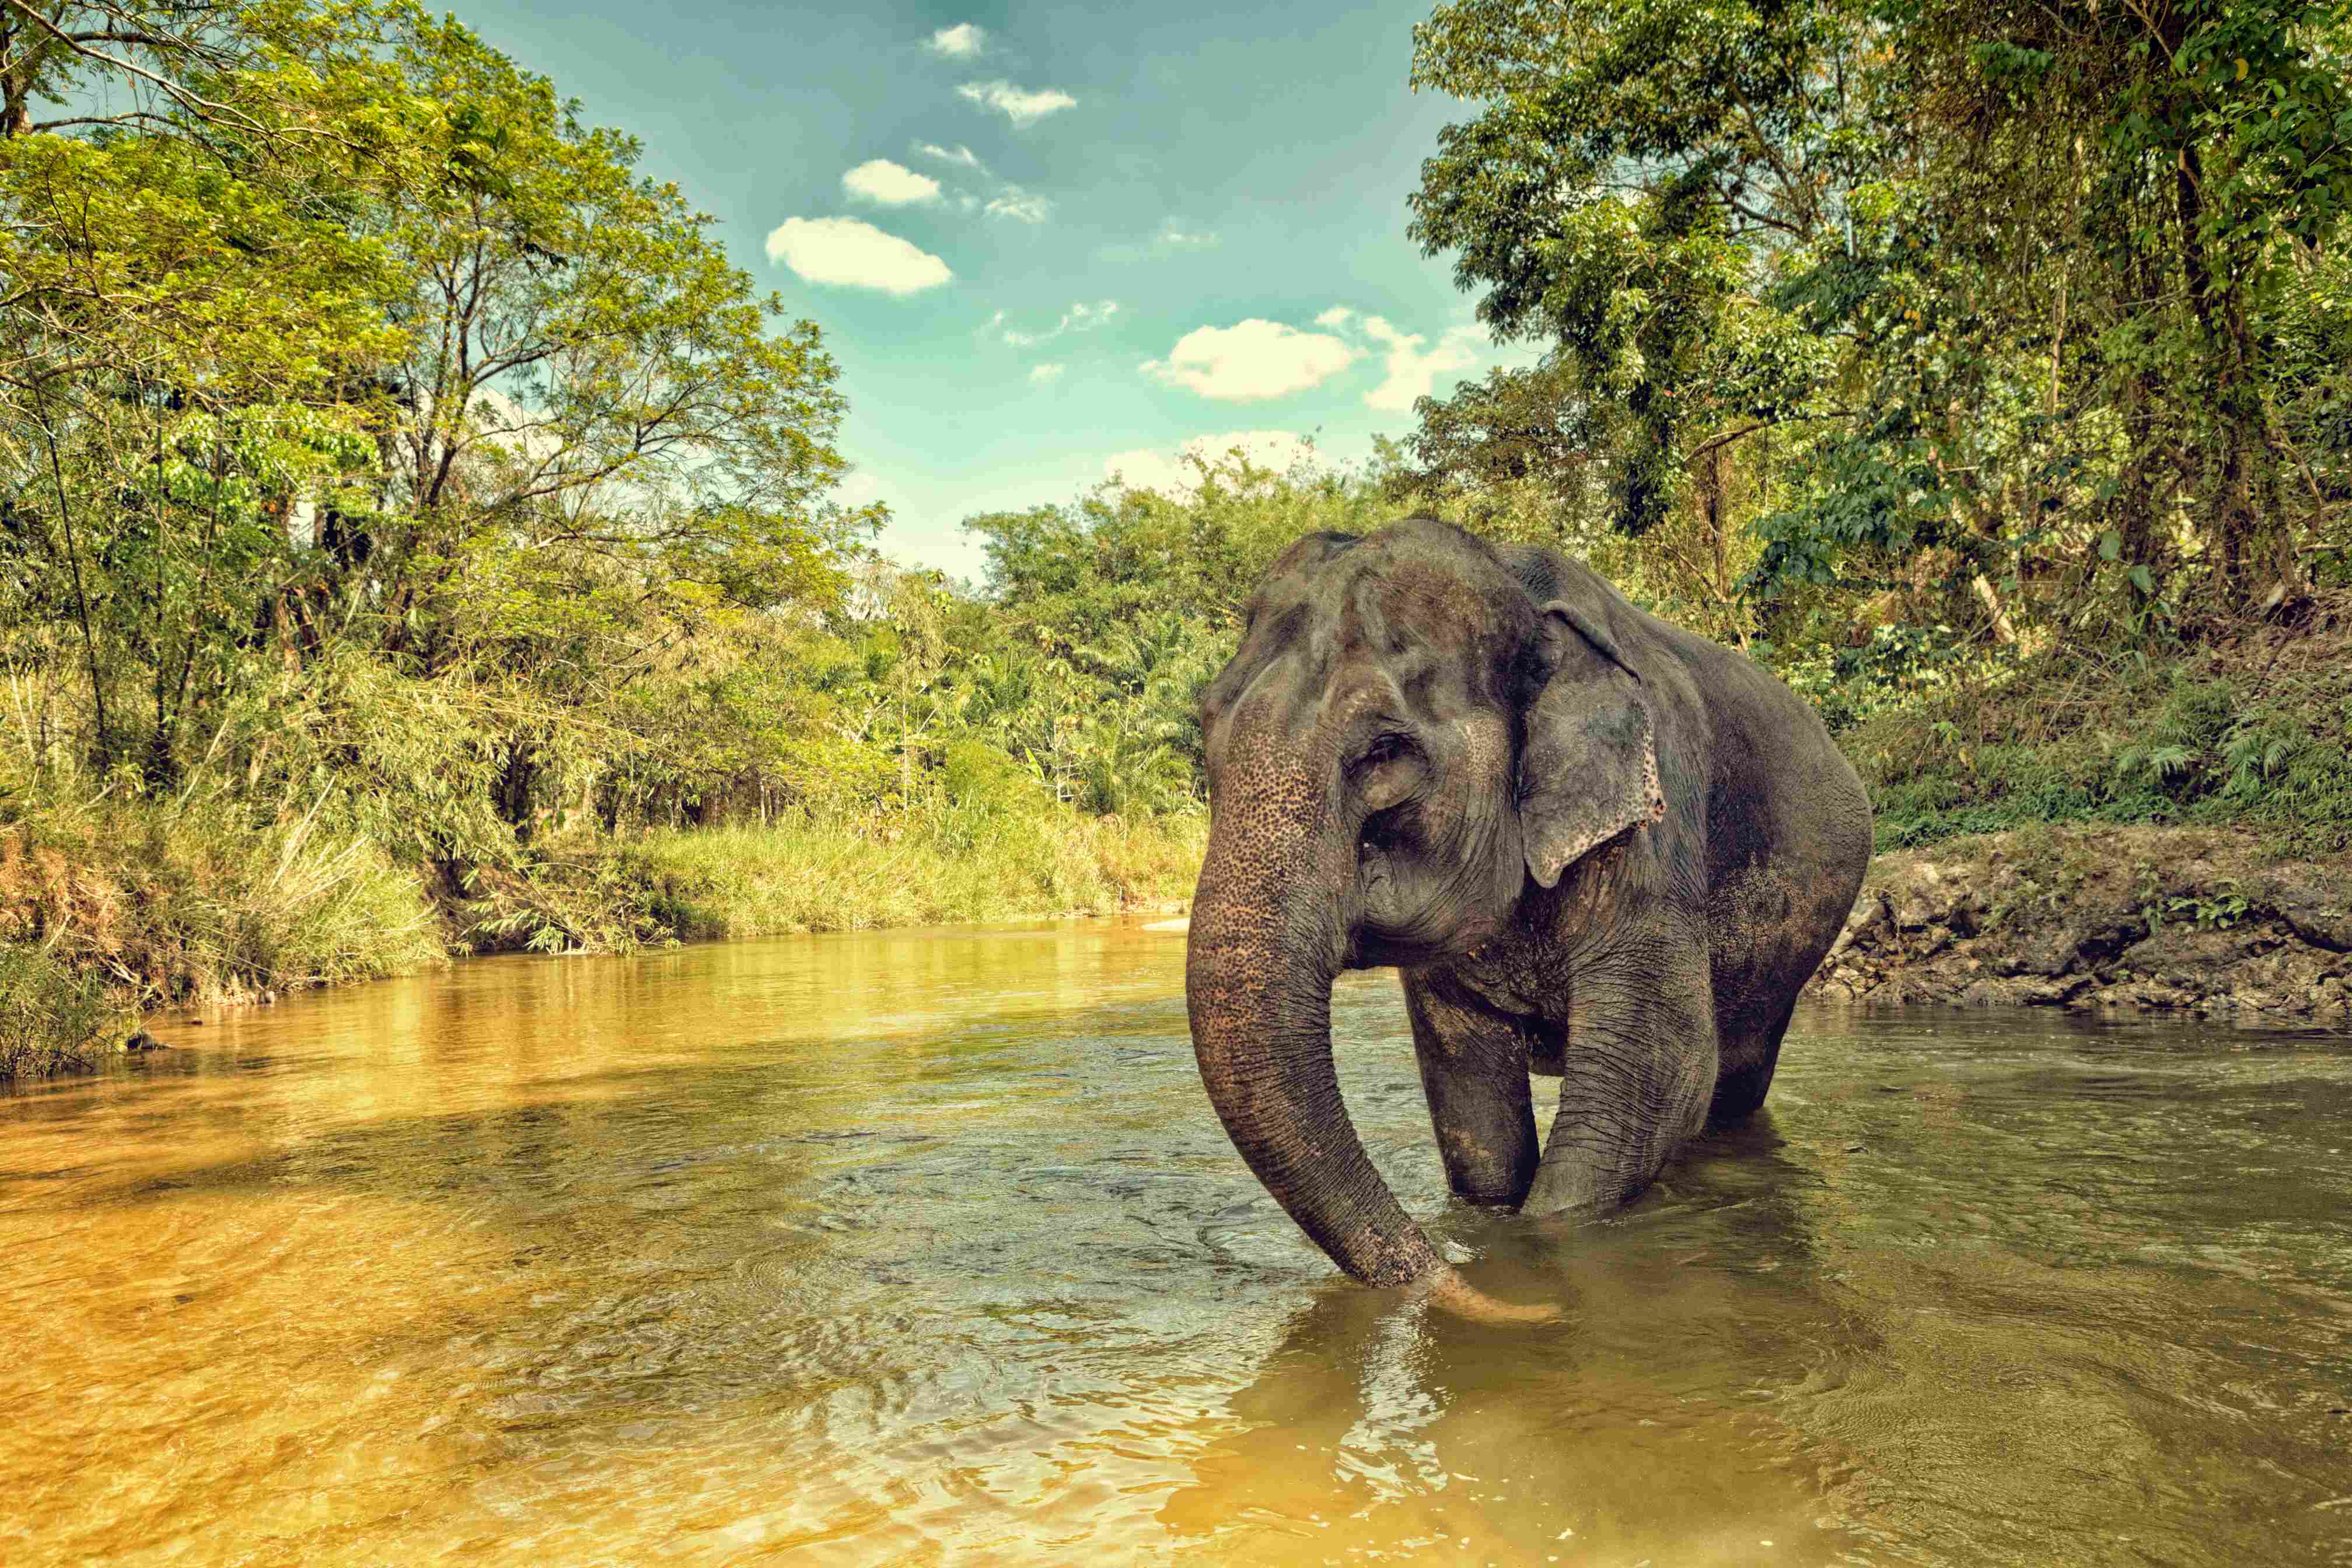 Elephant in jungle crossing a river.